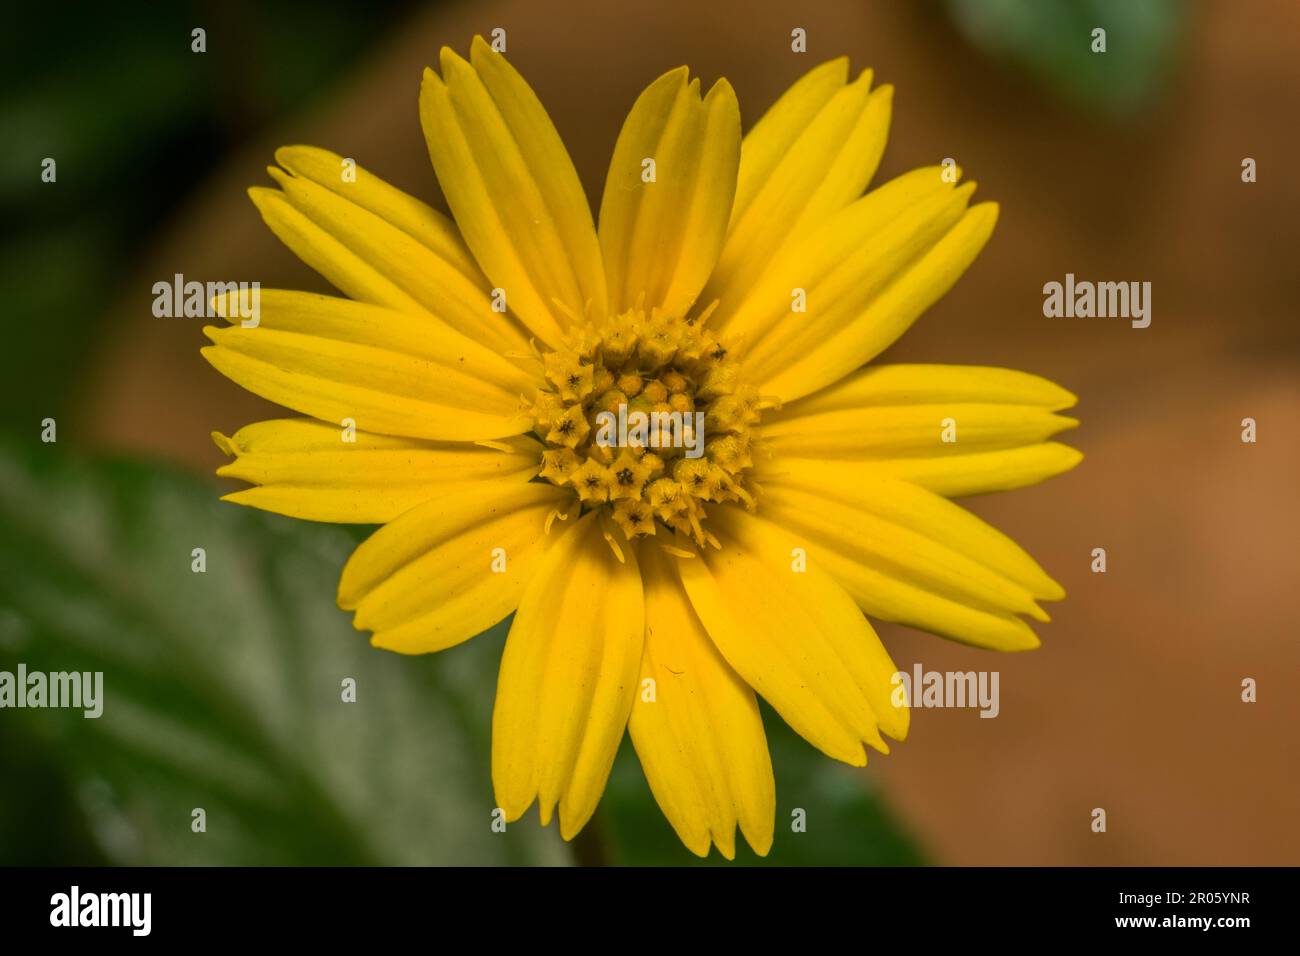 Close up macro shot of a bright yellow flower called the Singapore Daisy or Yellow Dots or Wedelia found in a garden in Mumbai, India Stock Photo